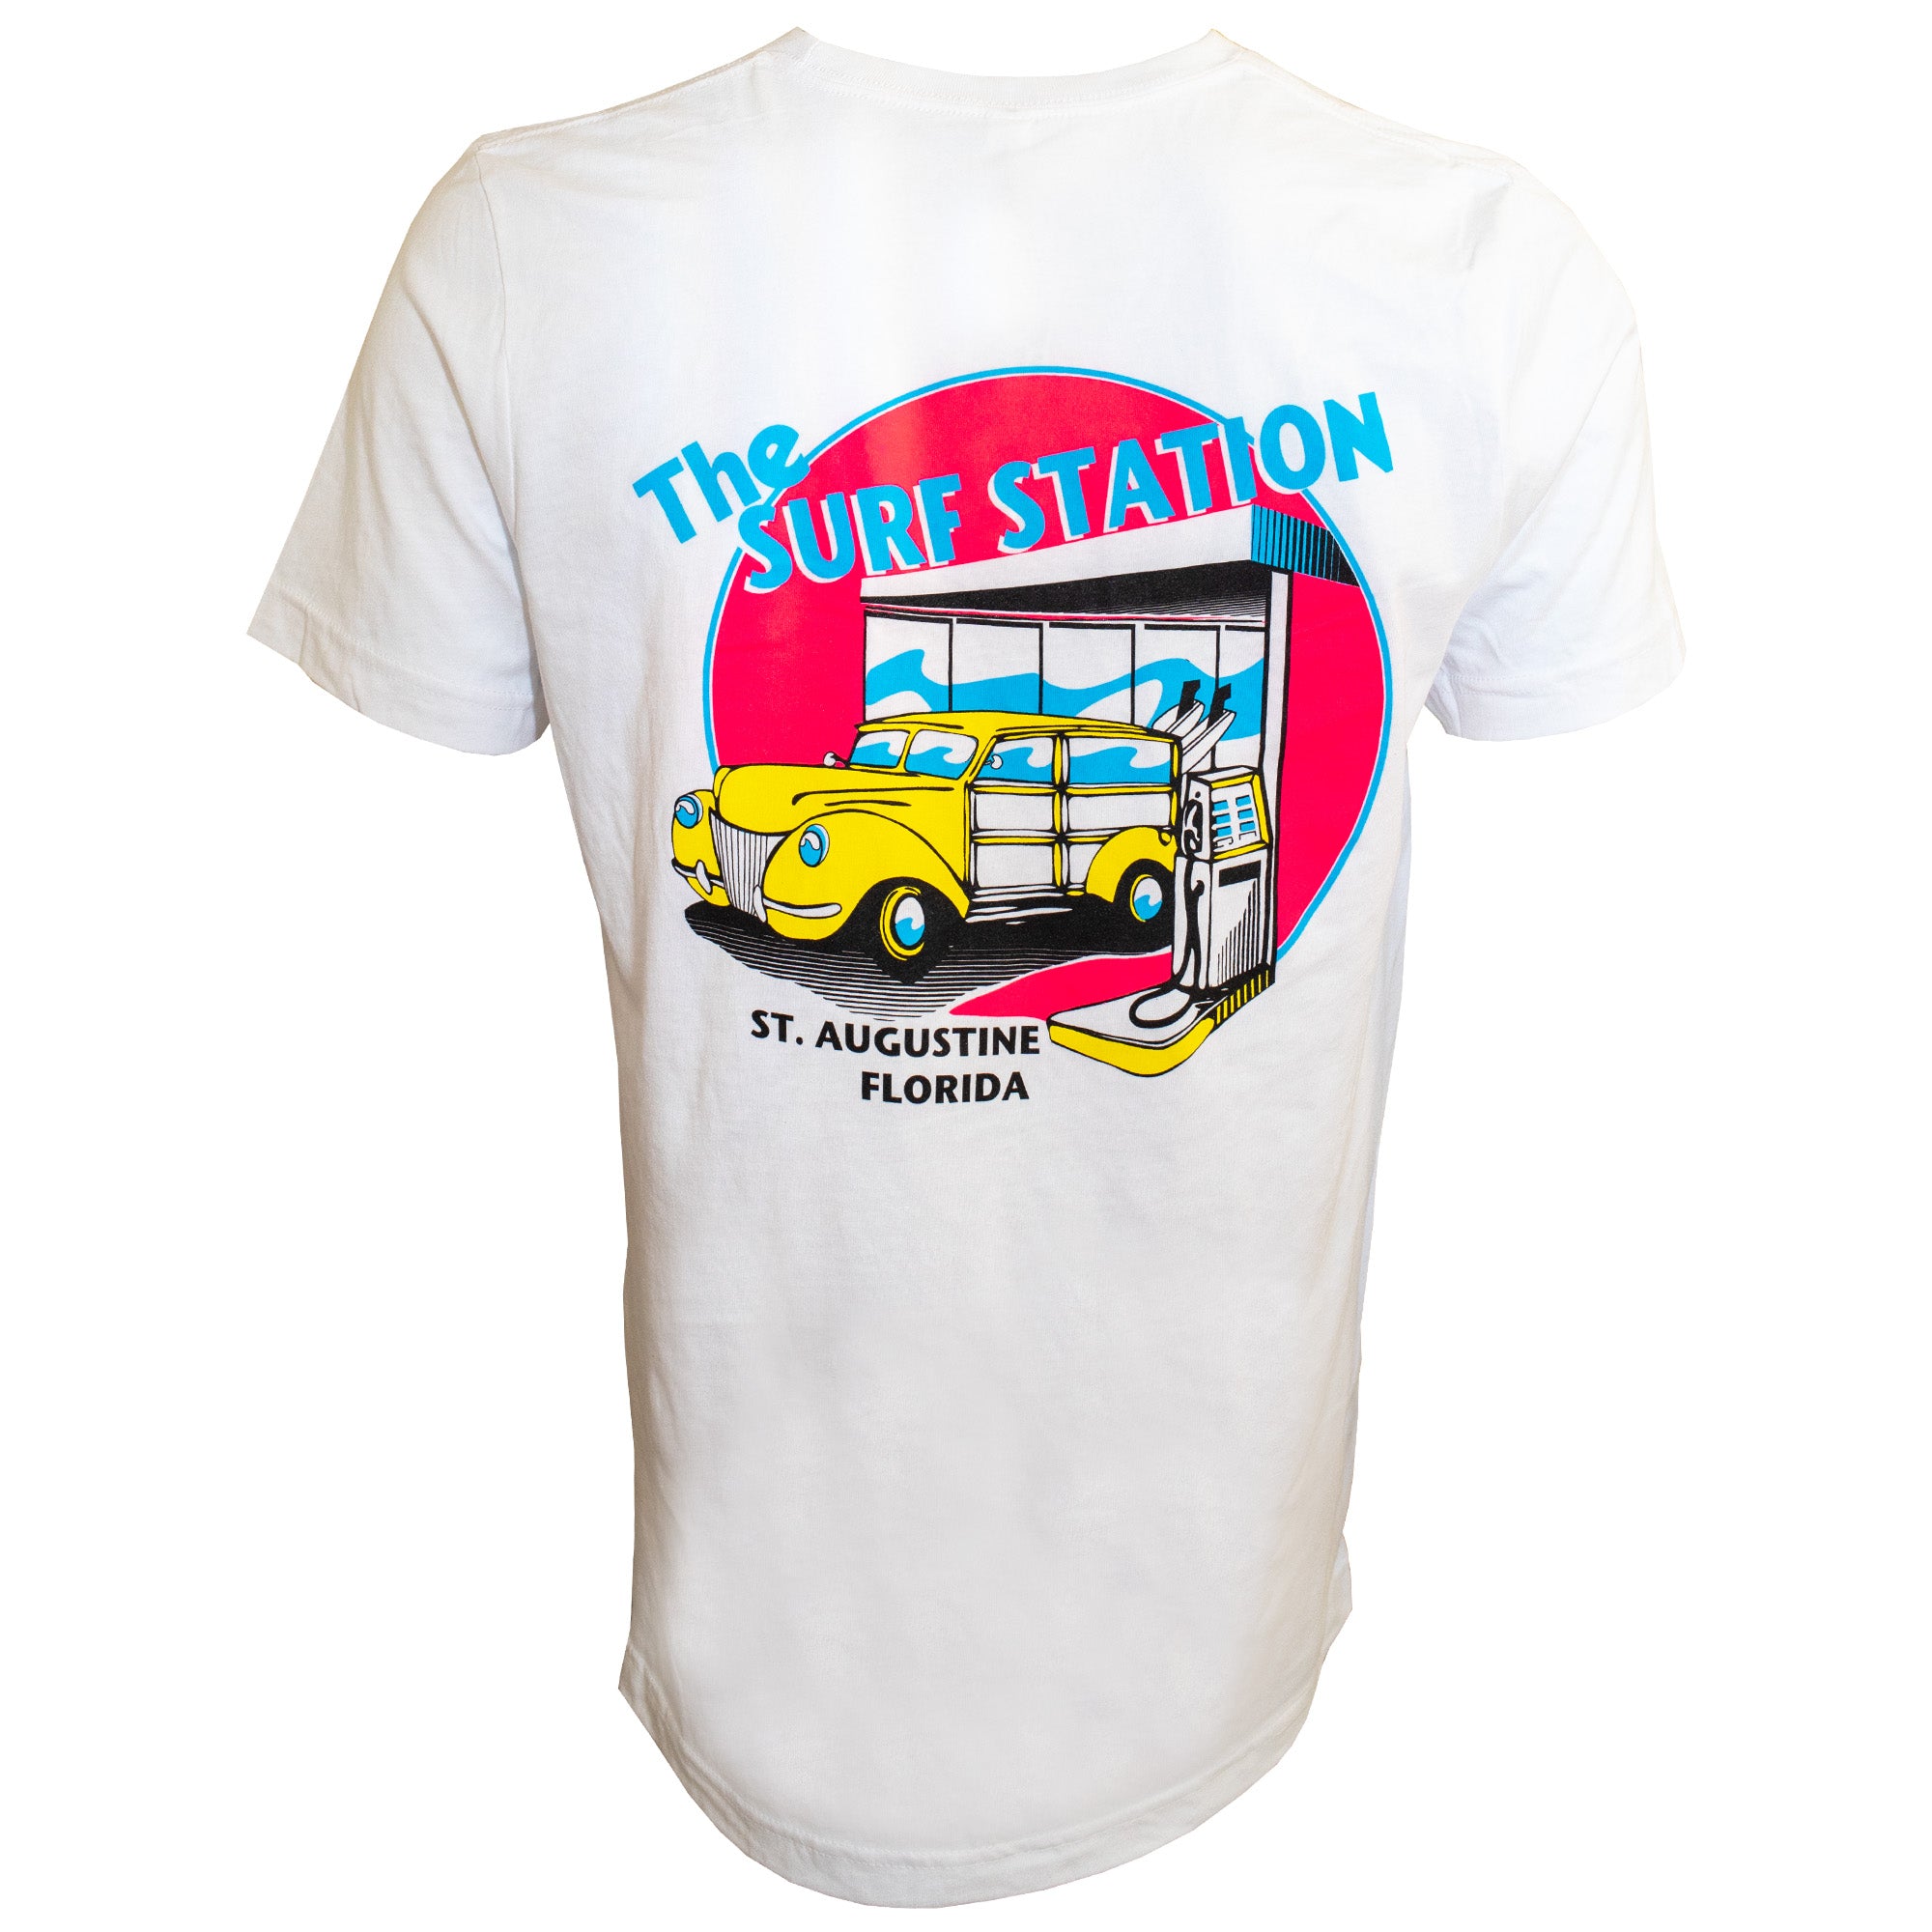 Surf Station Neon Woody Men's S/S T-Shirt